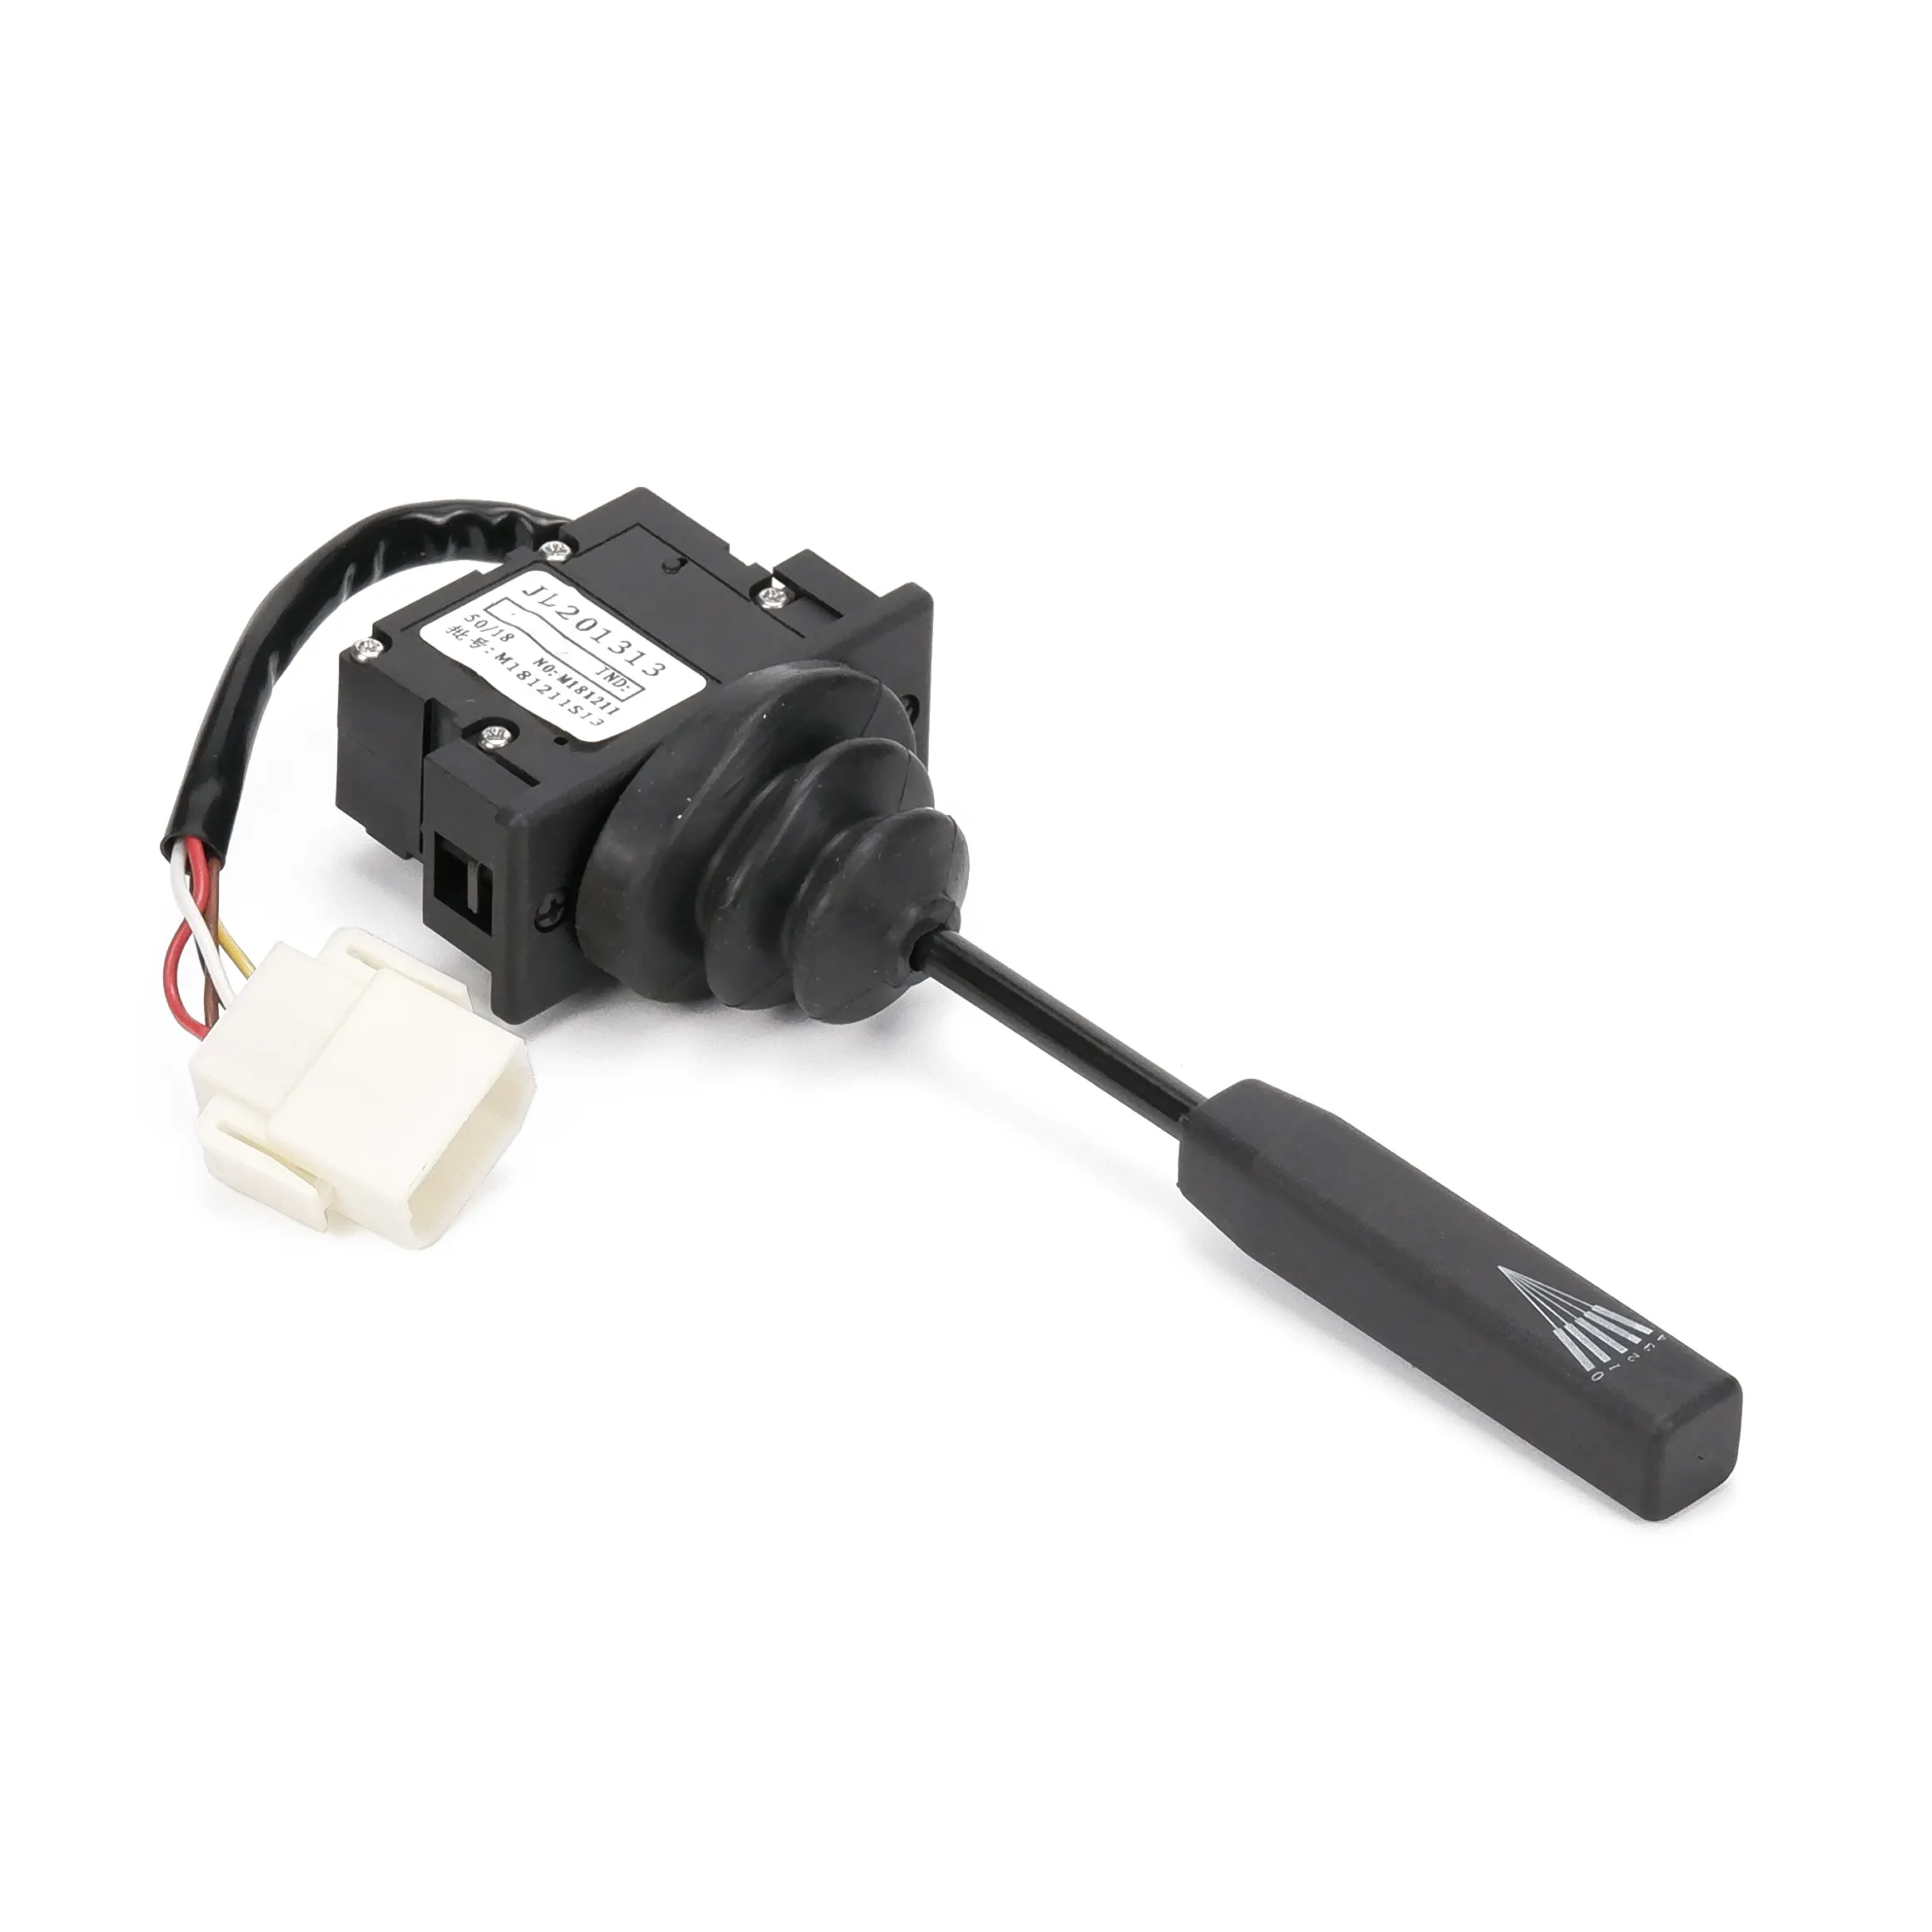 JL201313 universal switch assembly waterproof flame out control start stop button switch on-off handlebar switches for bus